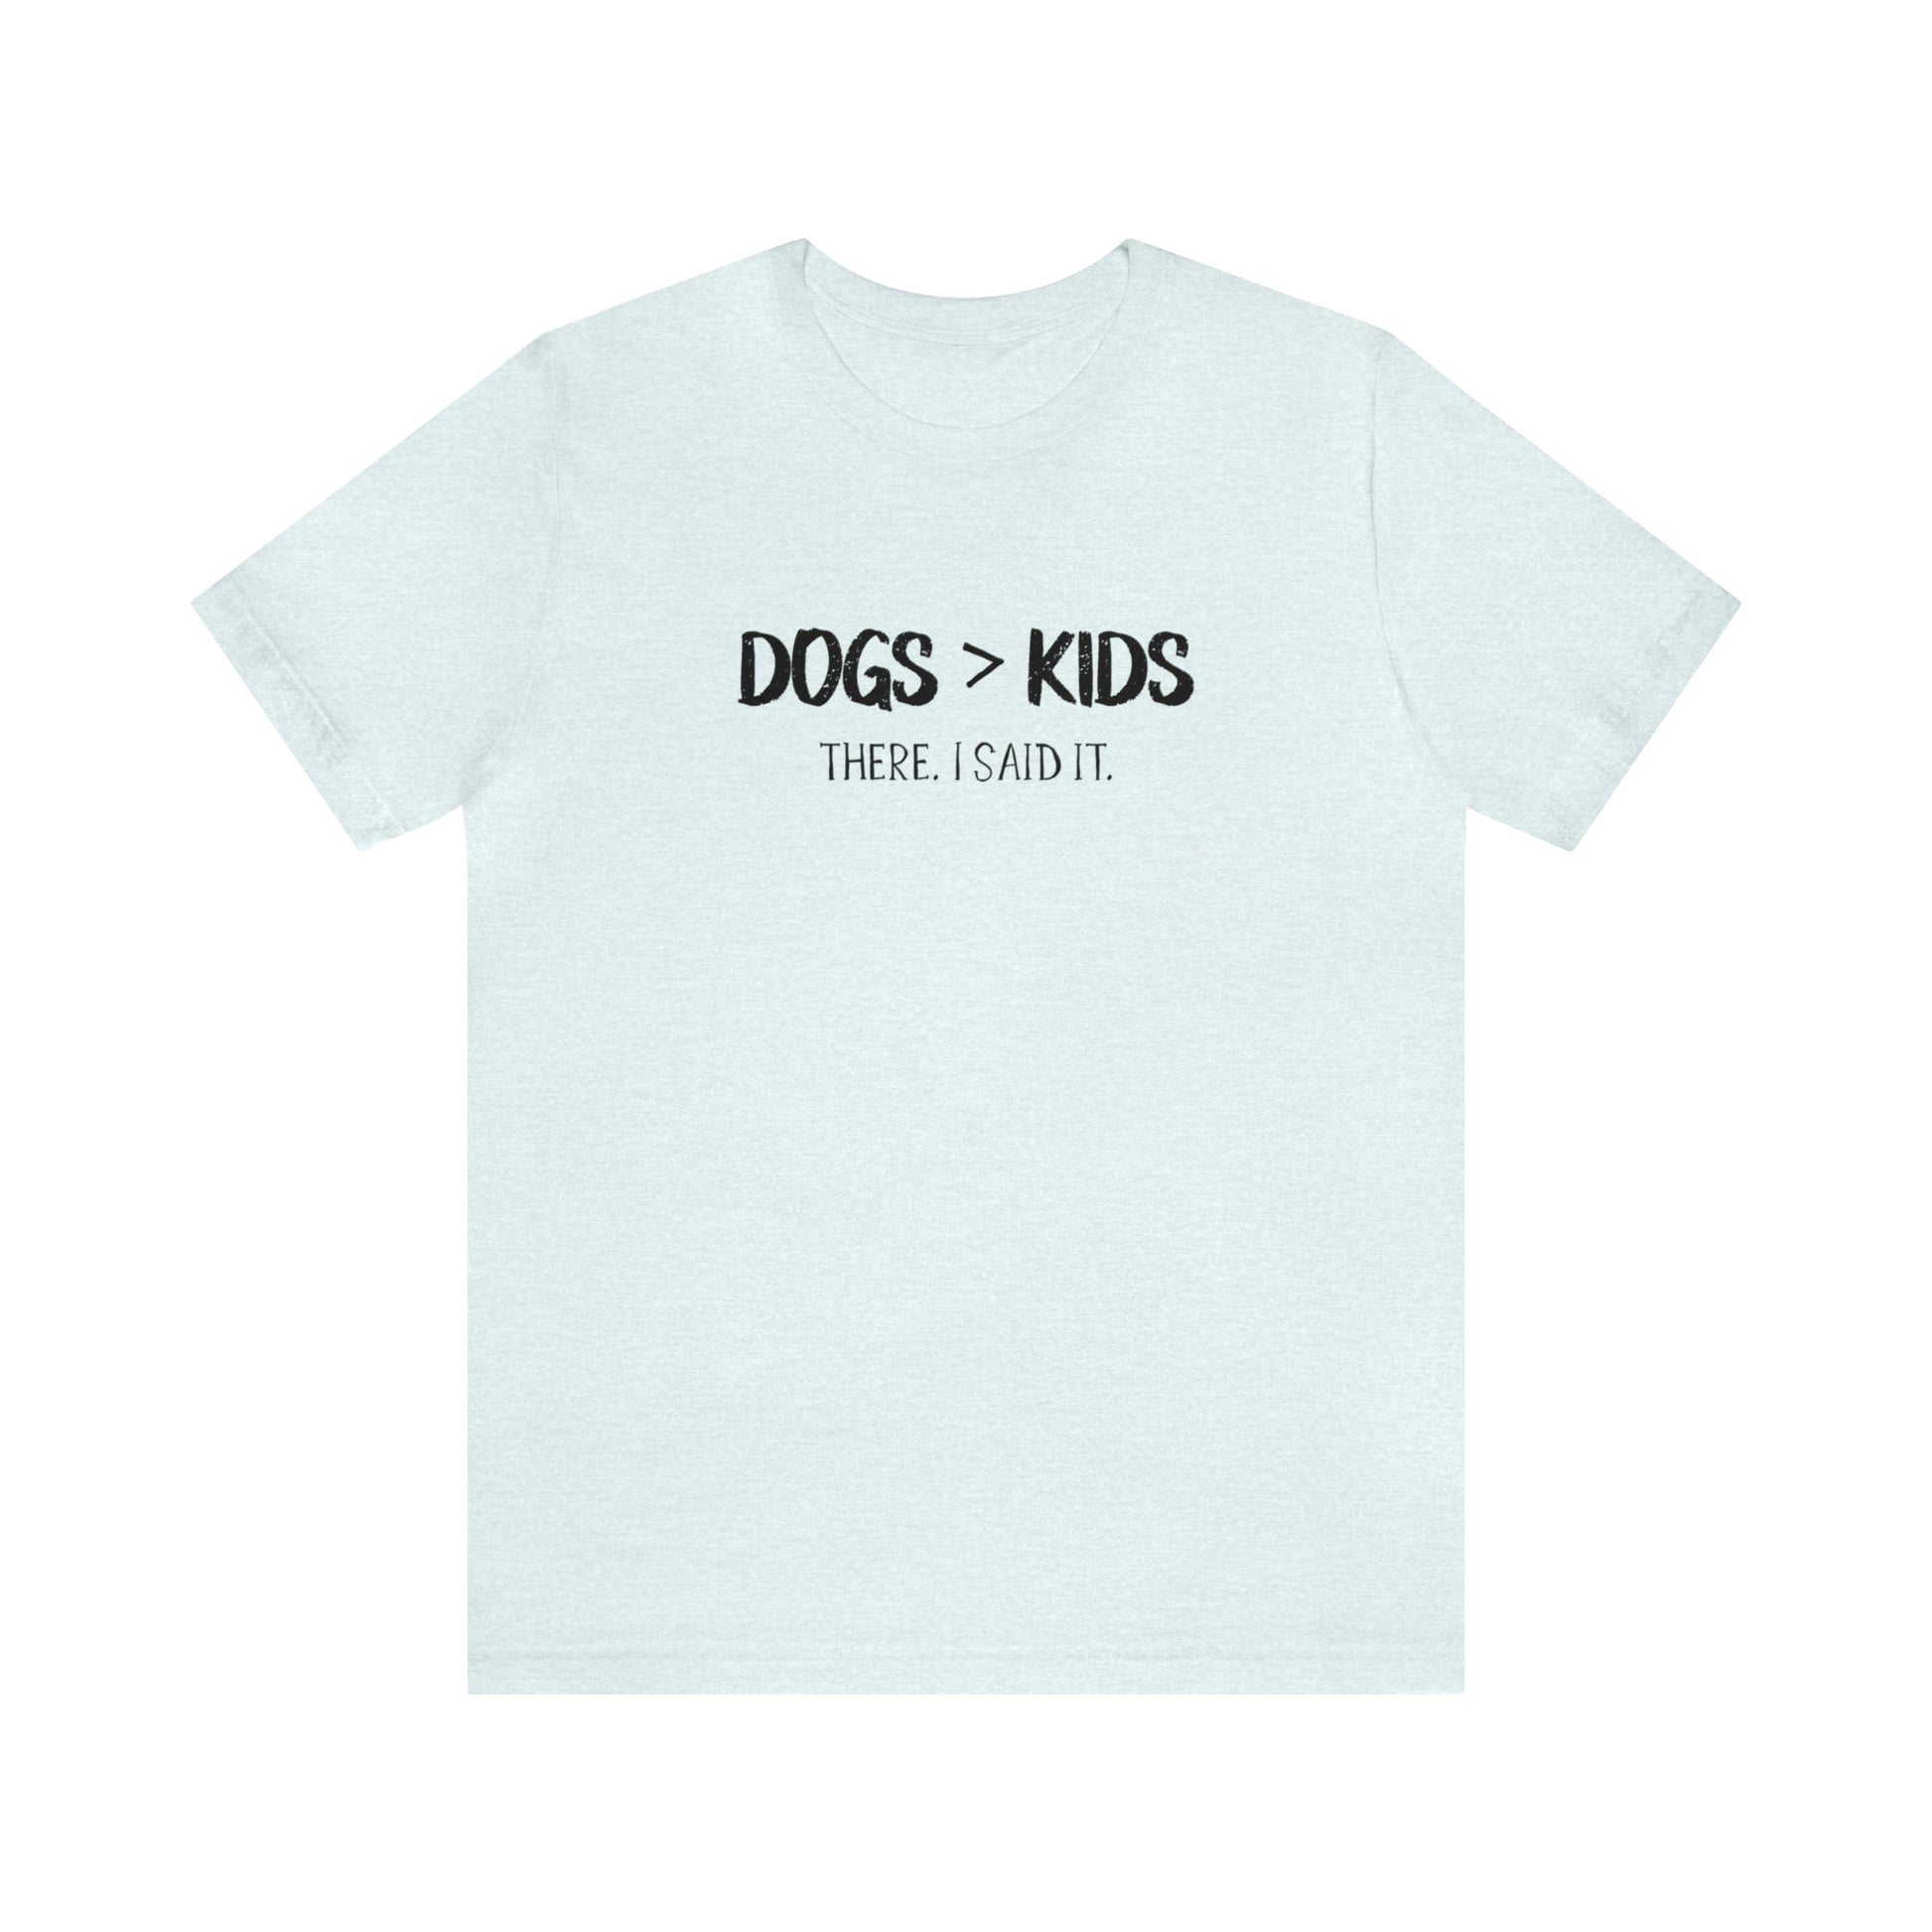 dogs are better than kids t shirt blue